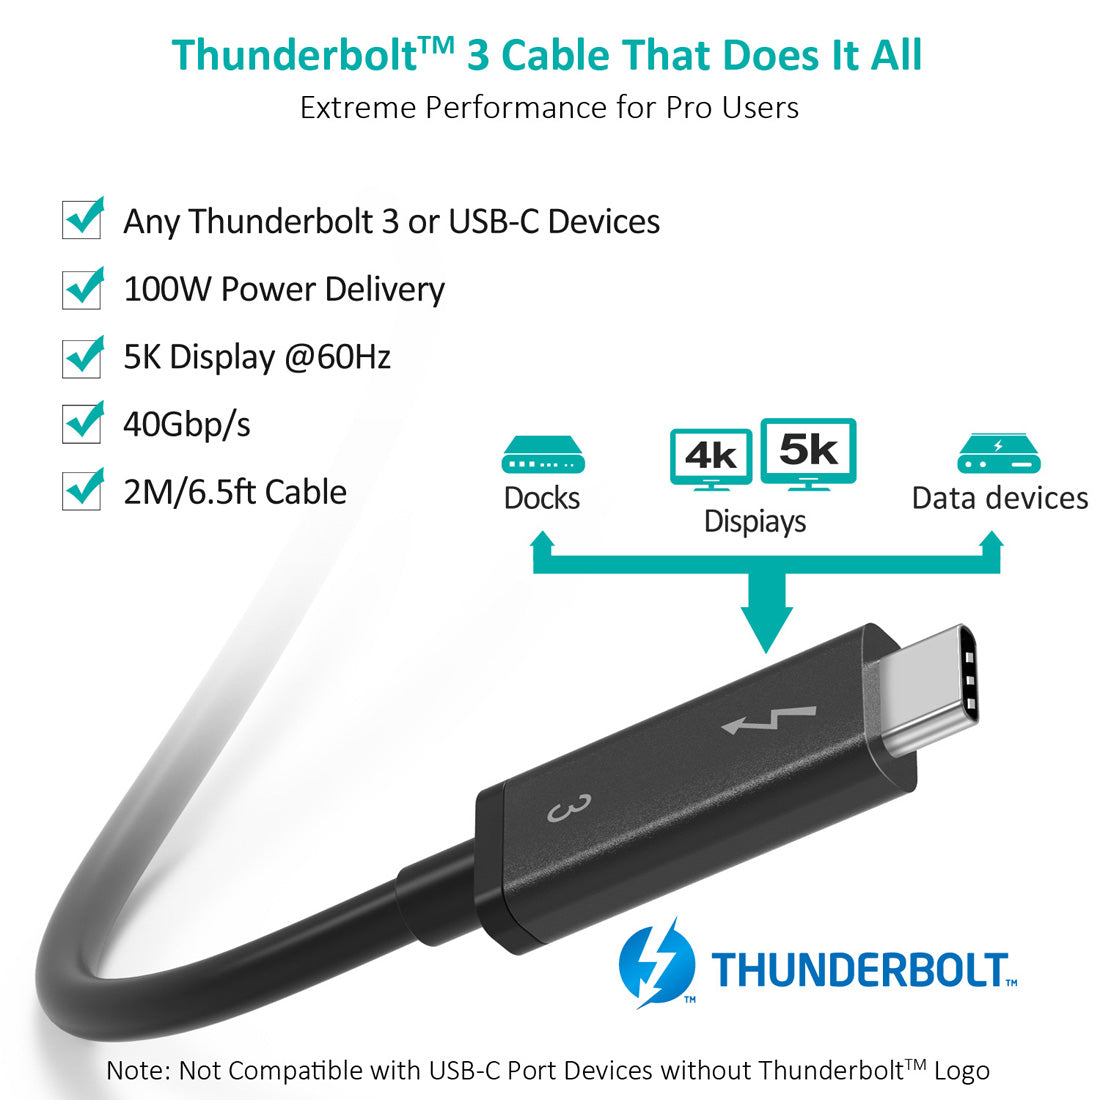 A3006 Choetech Thunderbolt 3 Cable (2M/6.5FT)–Active 40Gbps/100W Charging/5A,20V/Support 5K UHD Display